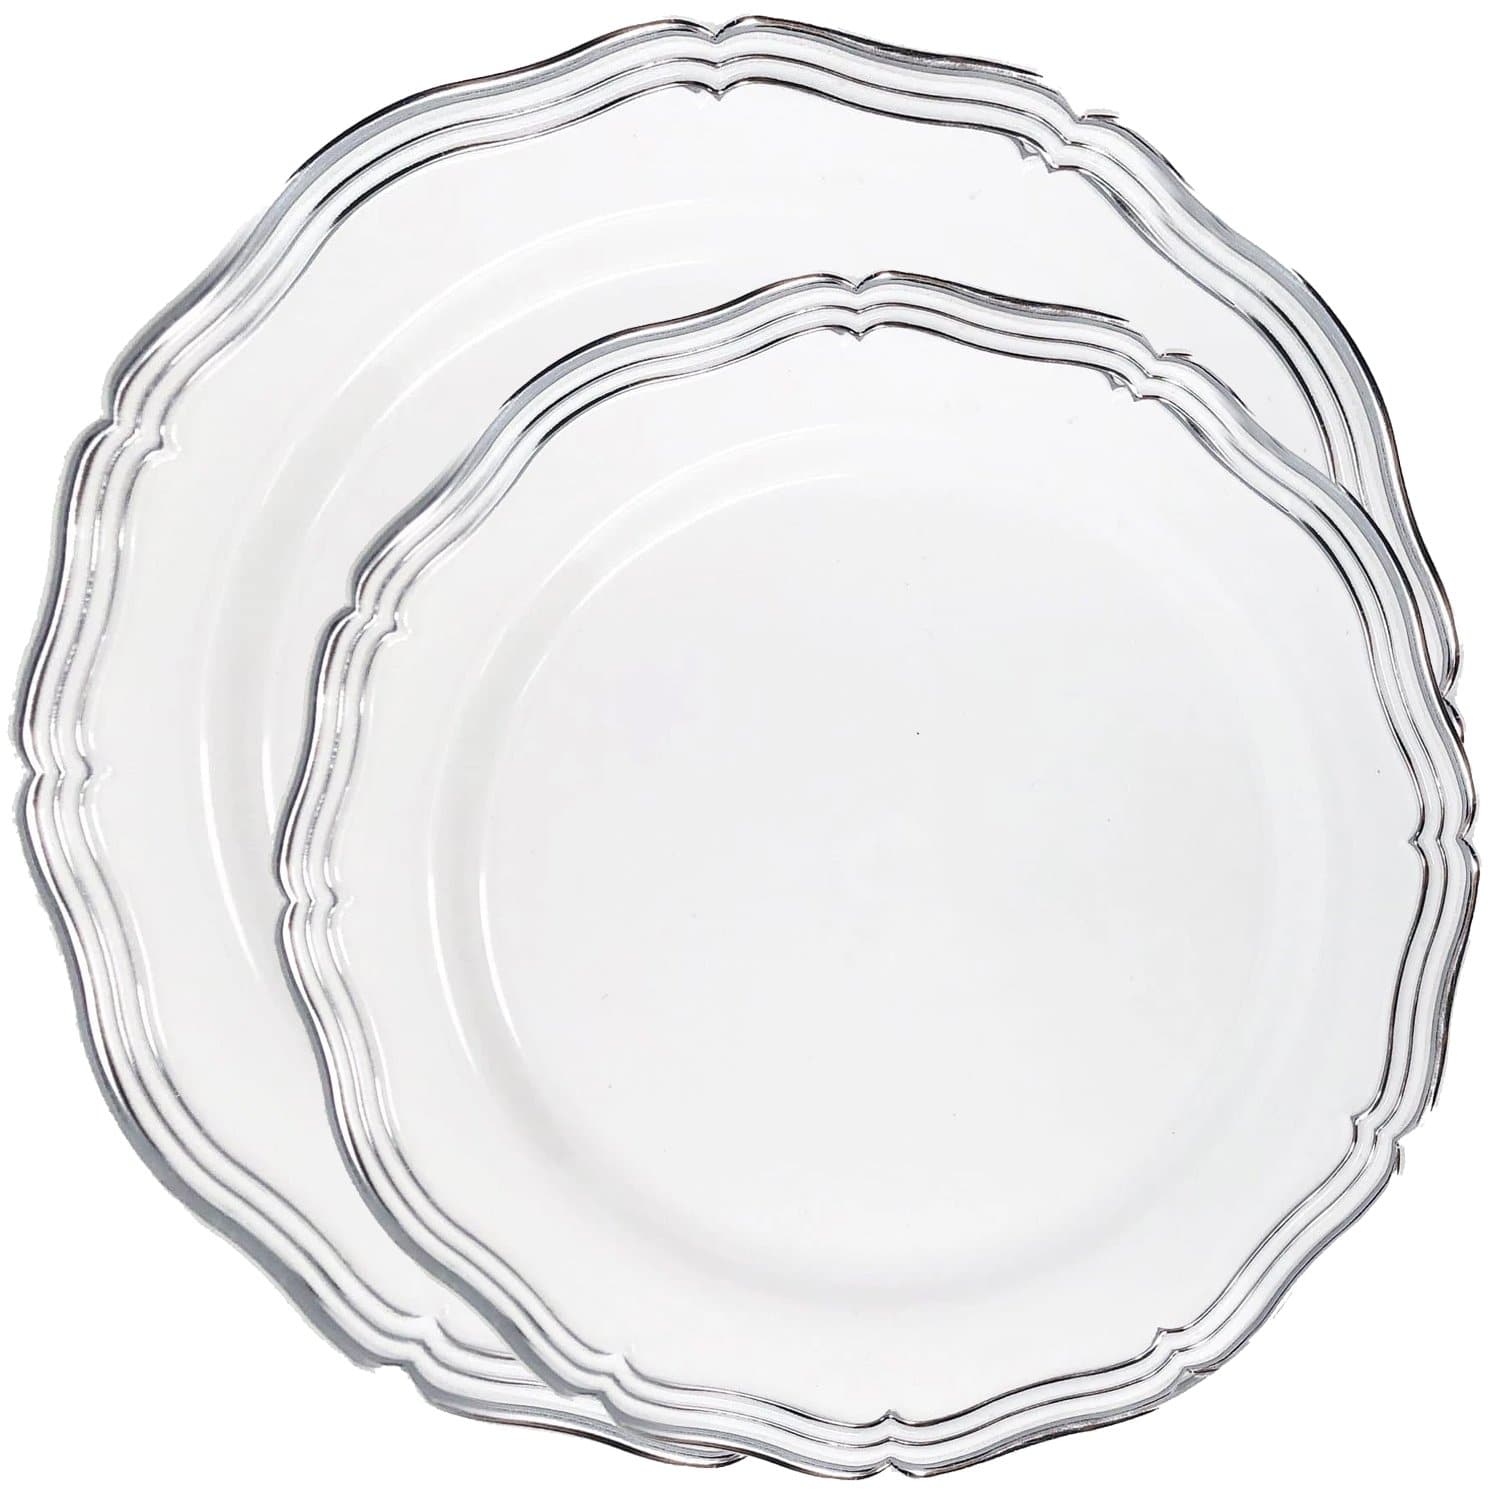 Aristocrat Collections Dinner Plate White & Silver Tableware Package Plates Decorline   